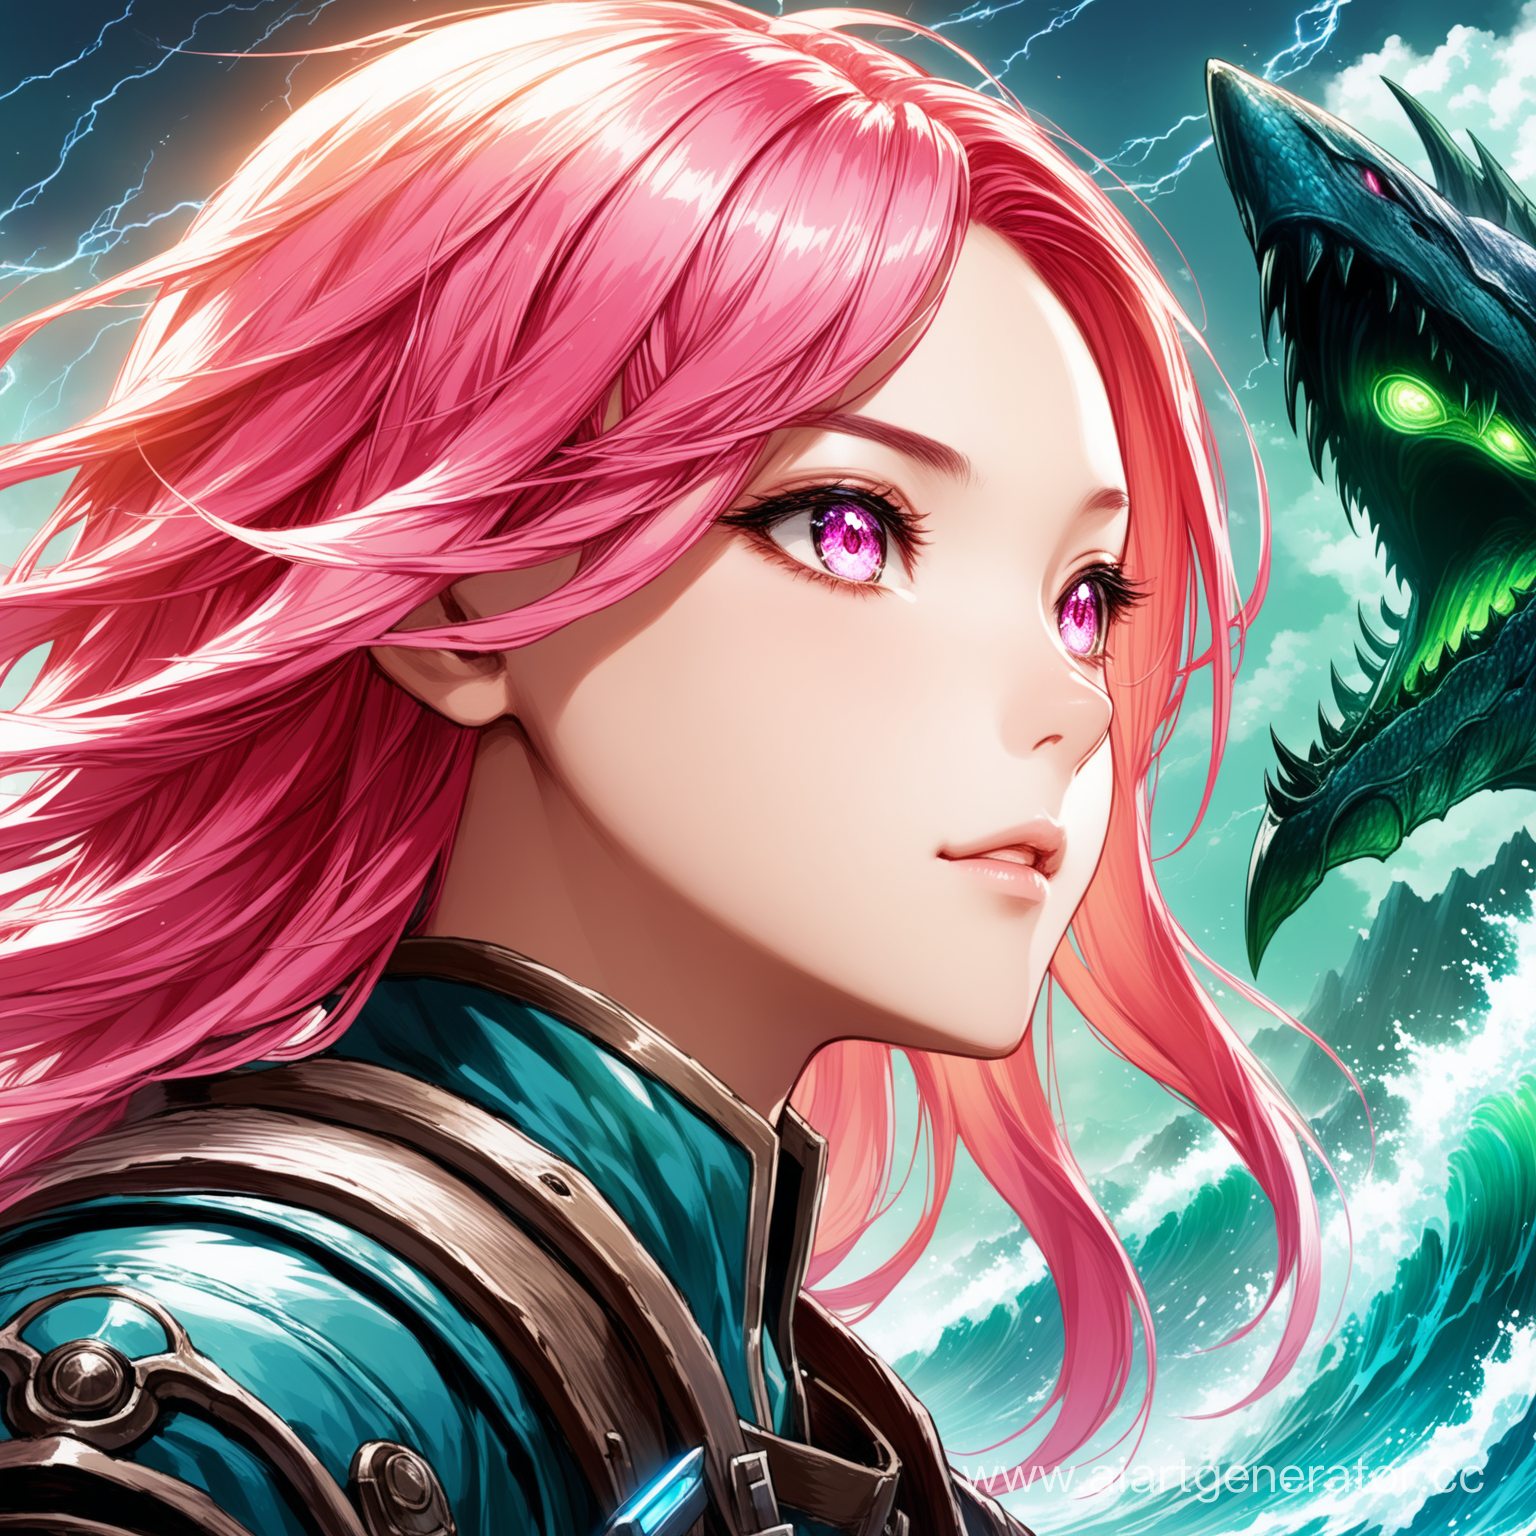 photo of a character from the game "Thunder Waves", Taoqi songronage, pink hair, very detailed face, detailed eyes, portrait, head turned sideways, gaze directed into the distance, detailed clothing, detailed environment, non-contrasting color, clear image, anime-style fantasy MMORPG, battle with alien creatures